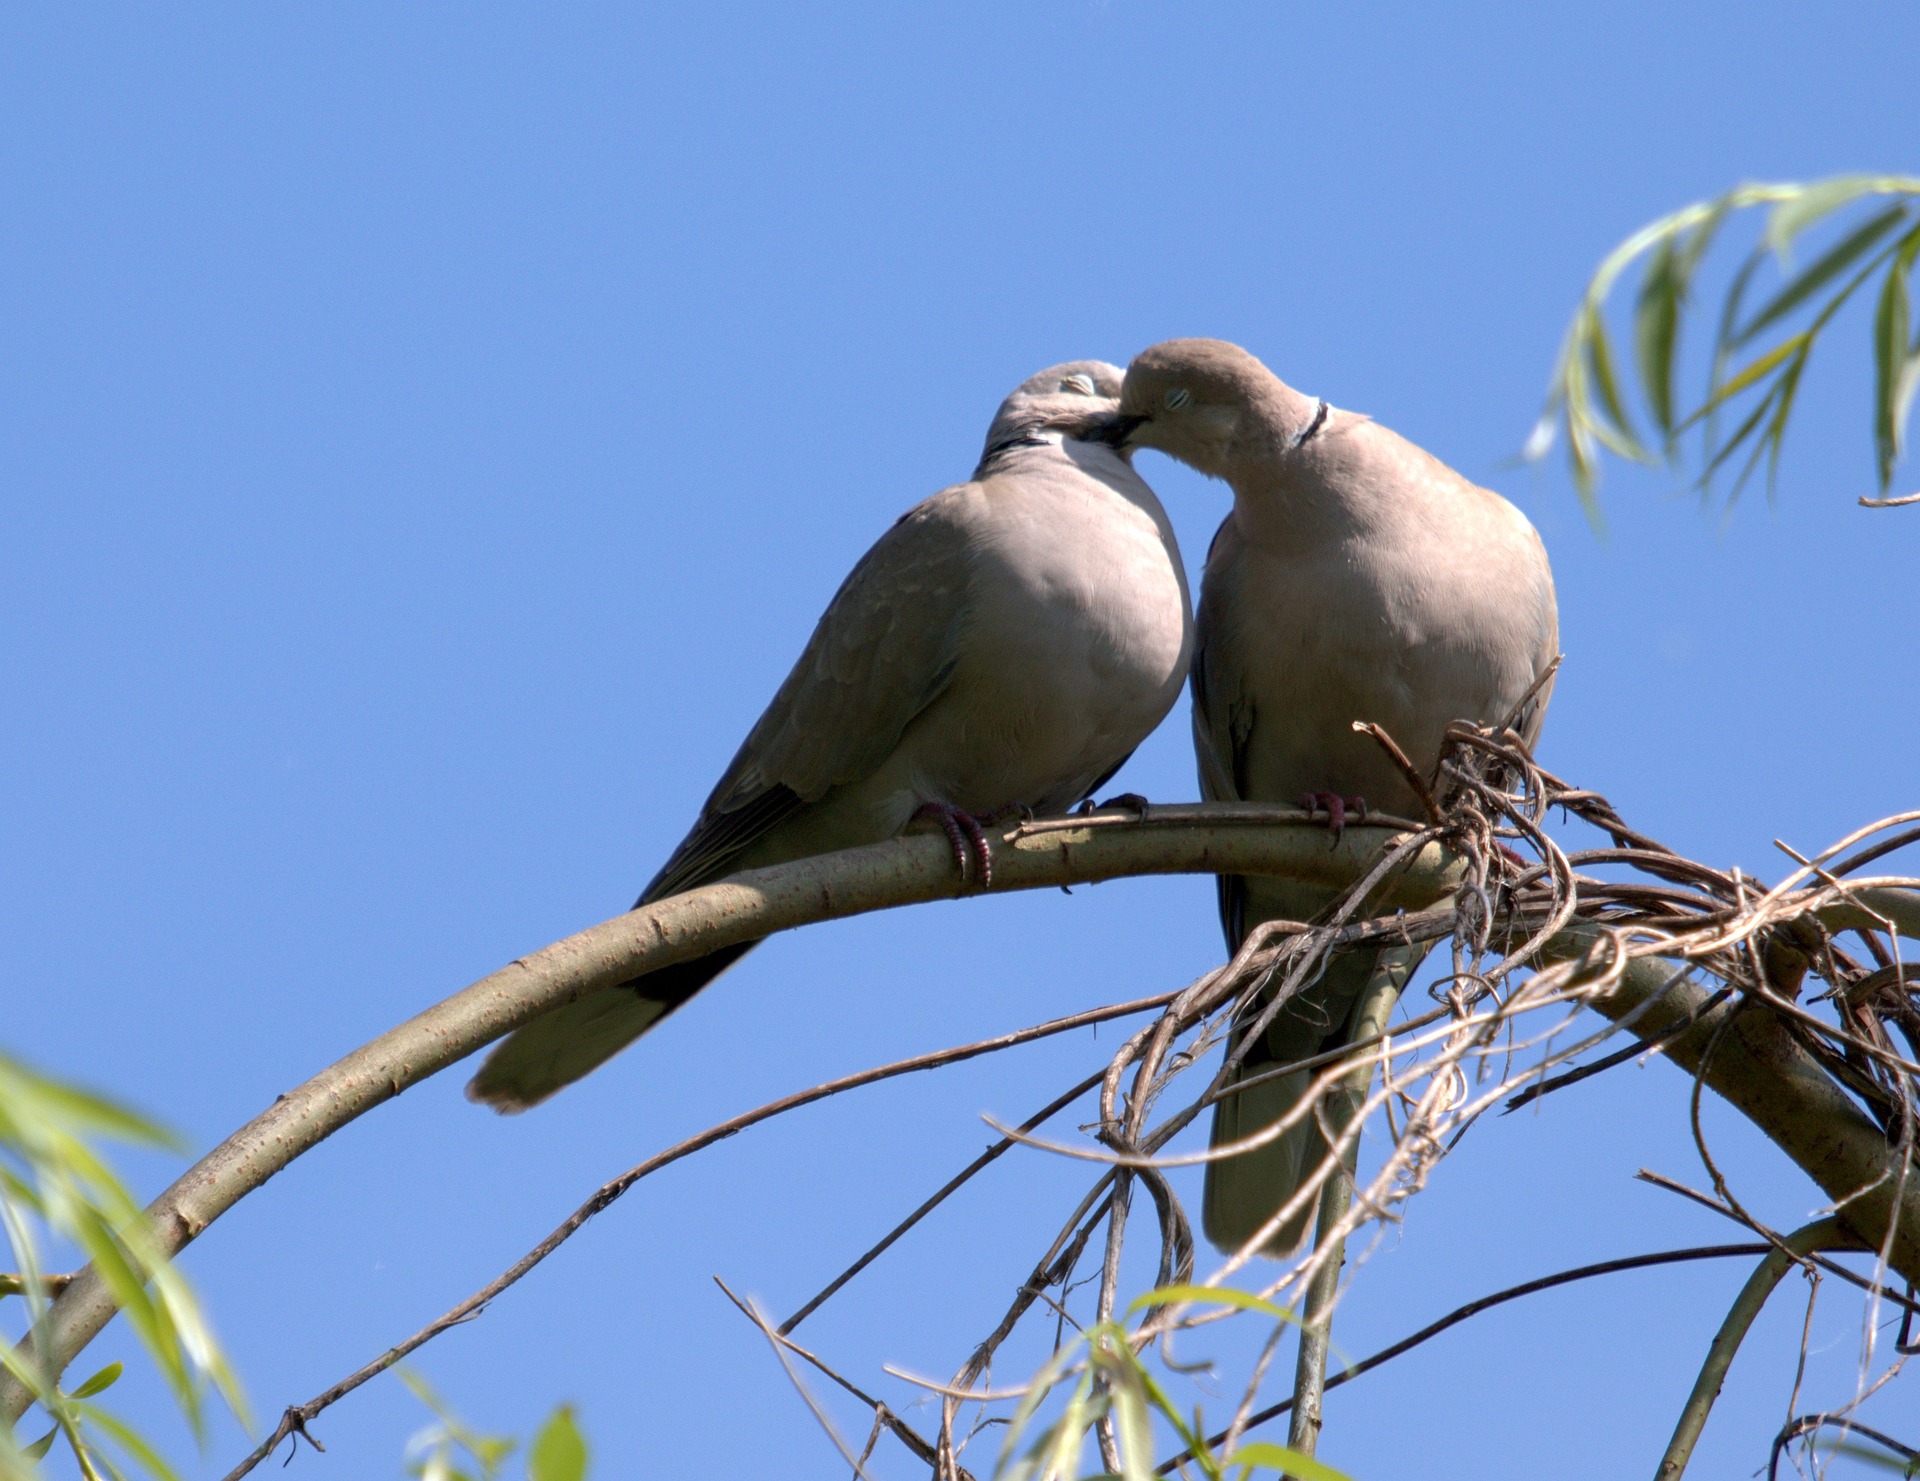 A dove couple cuddle up to each other on a tree branch.